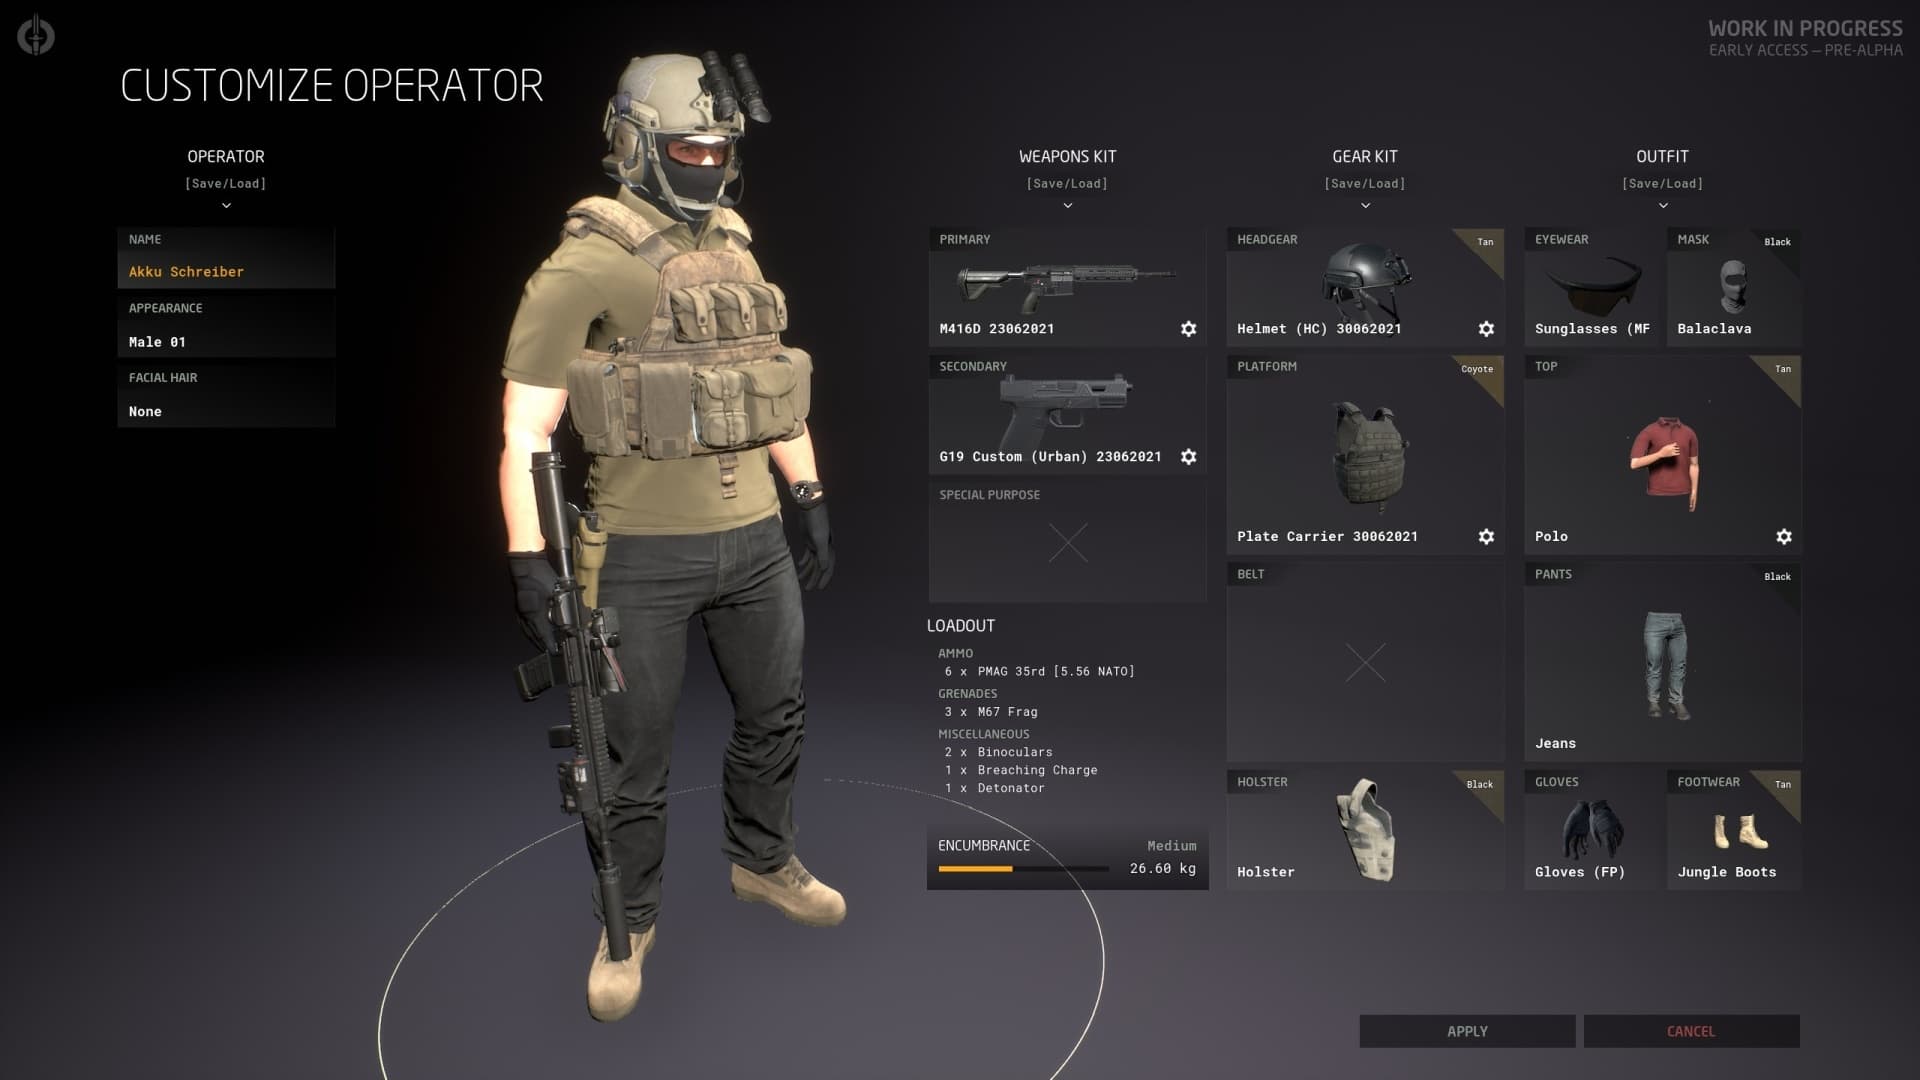 Your own operator in Ground Branch can be customised in detail, which also affects overall weight and thus movement speed.